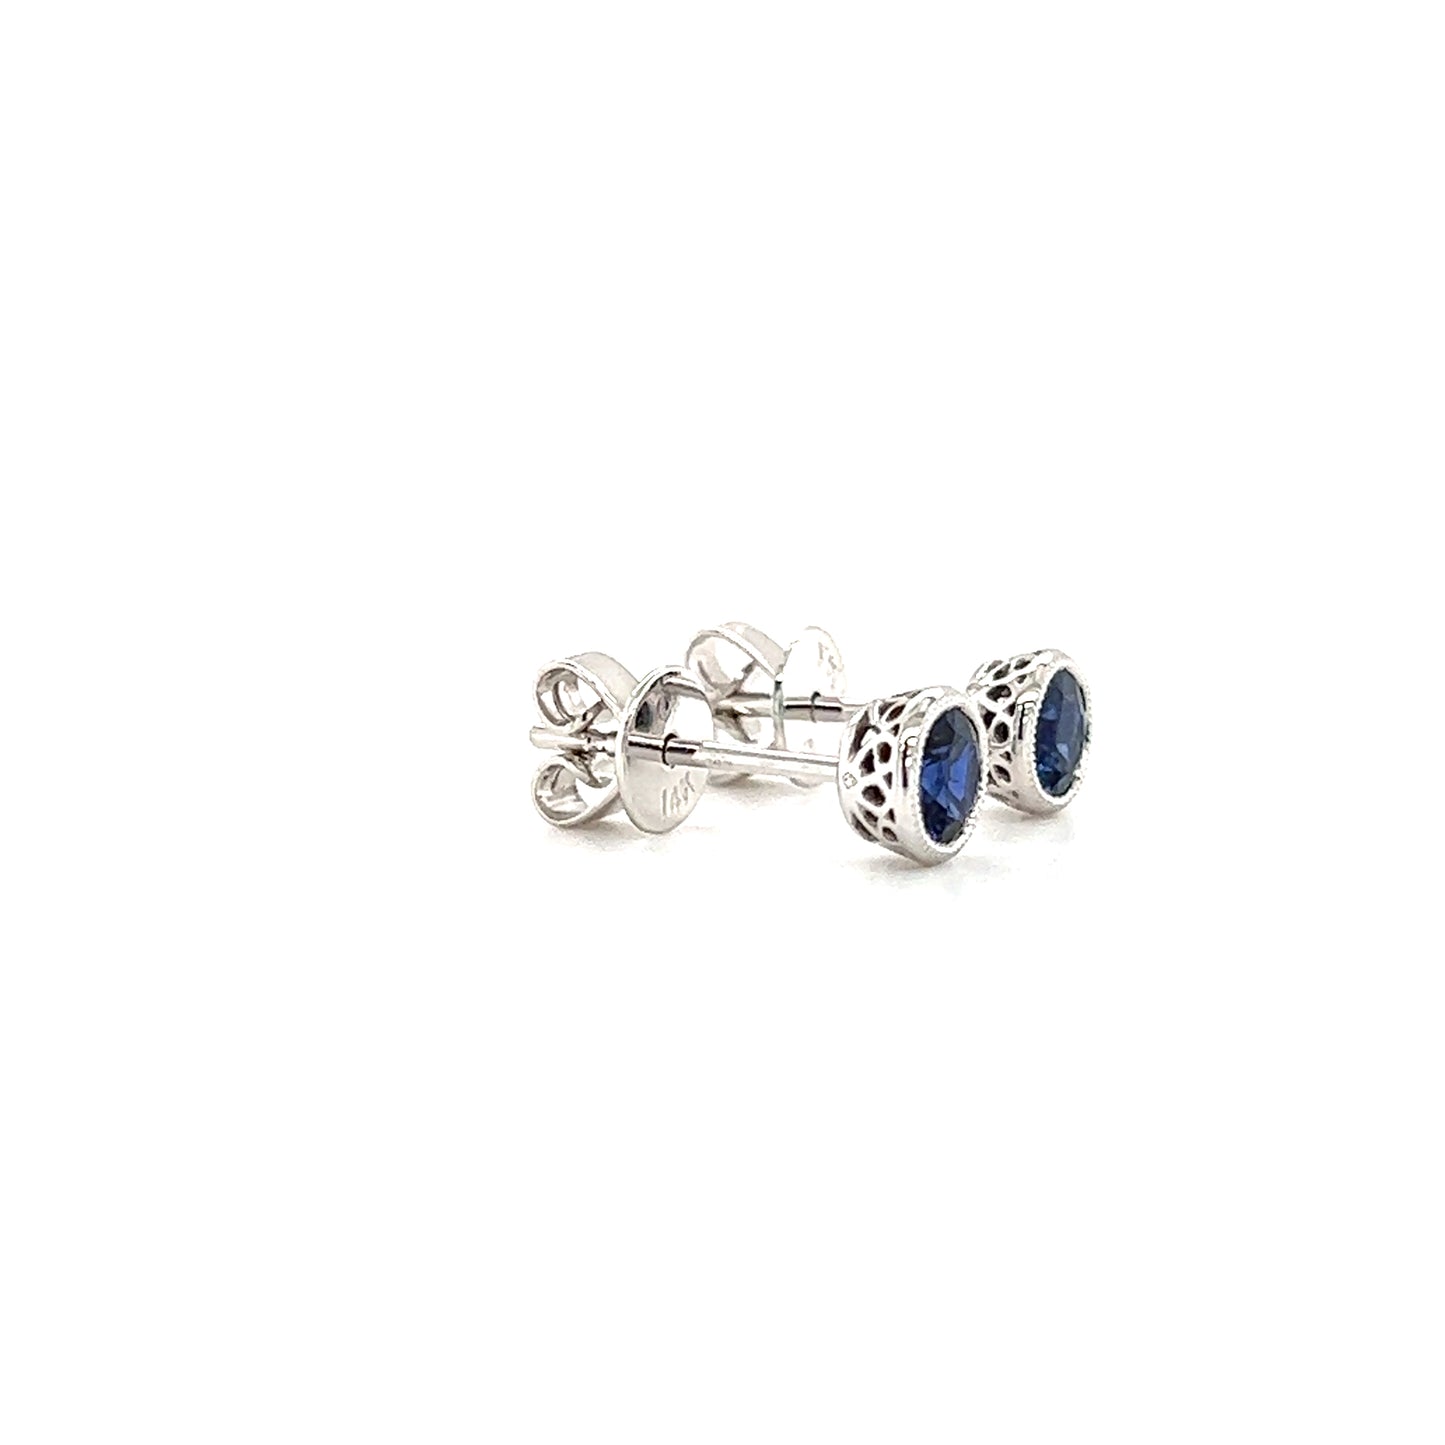 Round Sapphire Stud Earrings with Filigree and Milgrain in 14K White Gold Right Side View